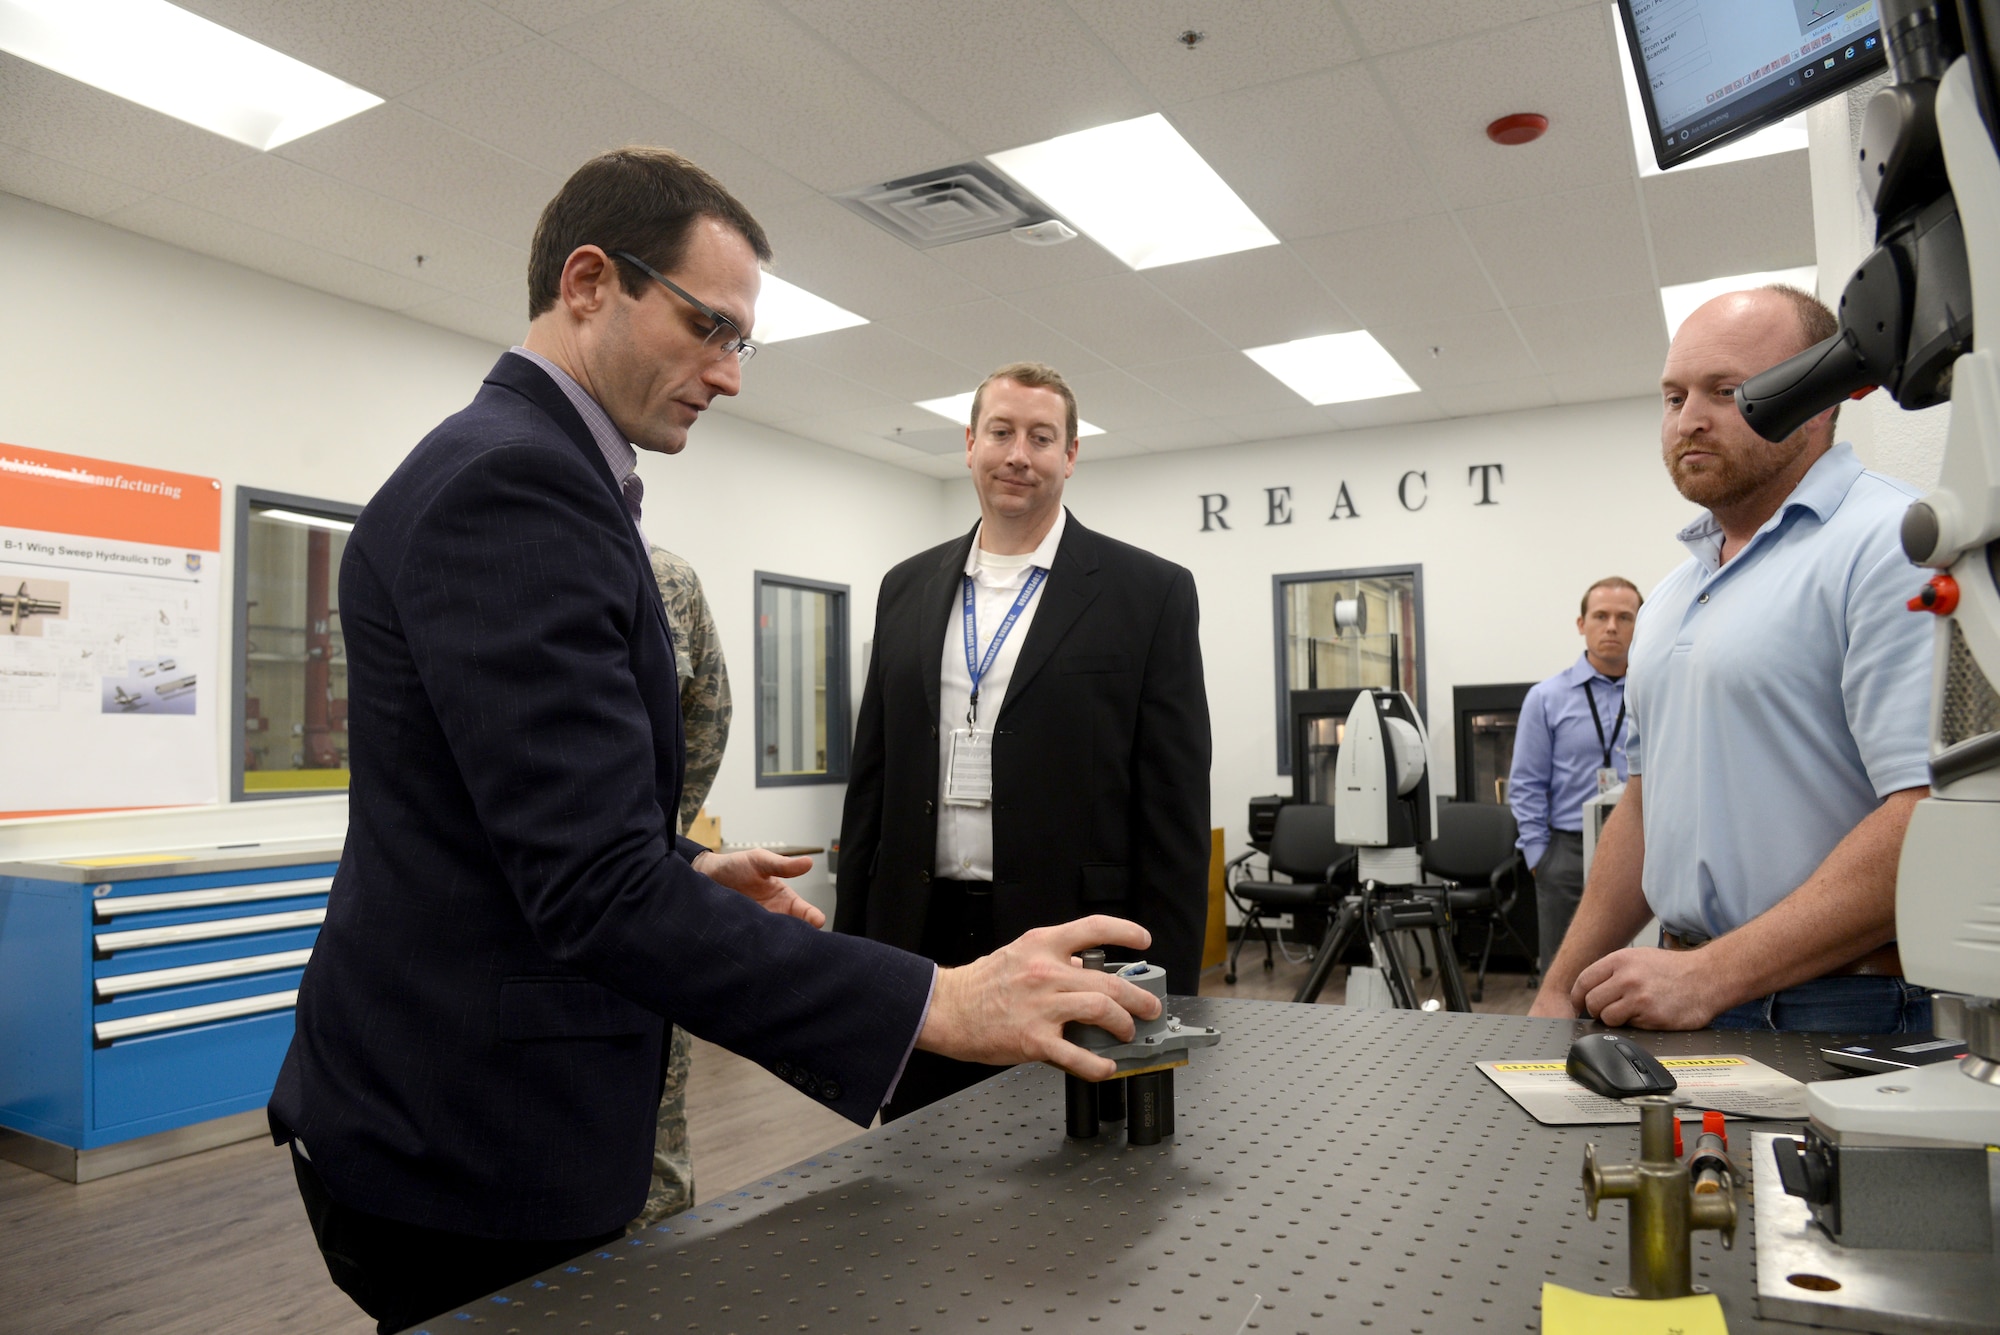 Assistant Secretary of the Air Force for Acquisition, Technology and Logistics Dr. Will Roper visited Tinker Air Force Base Sept. 13 to gain a better understanding of the Air Force Sustainment Center mission as the supporting command for readiness in the Air Force.